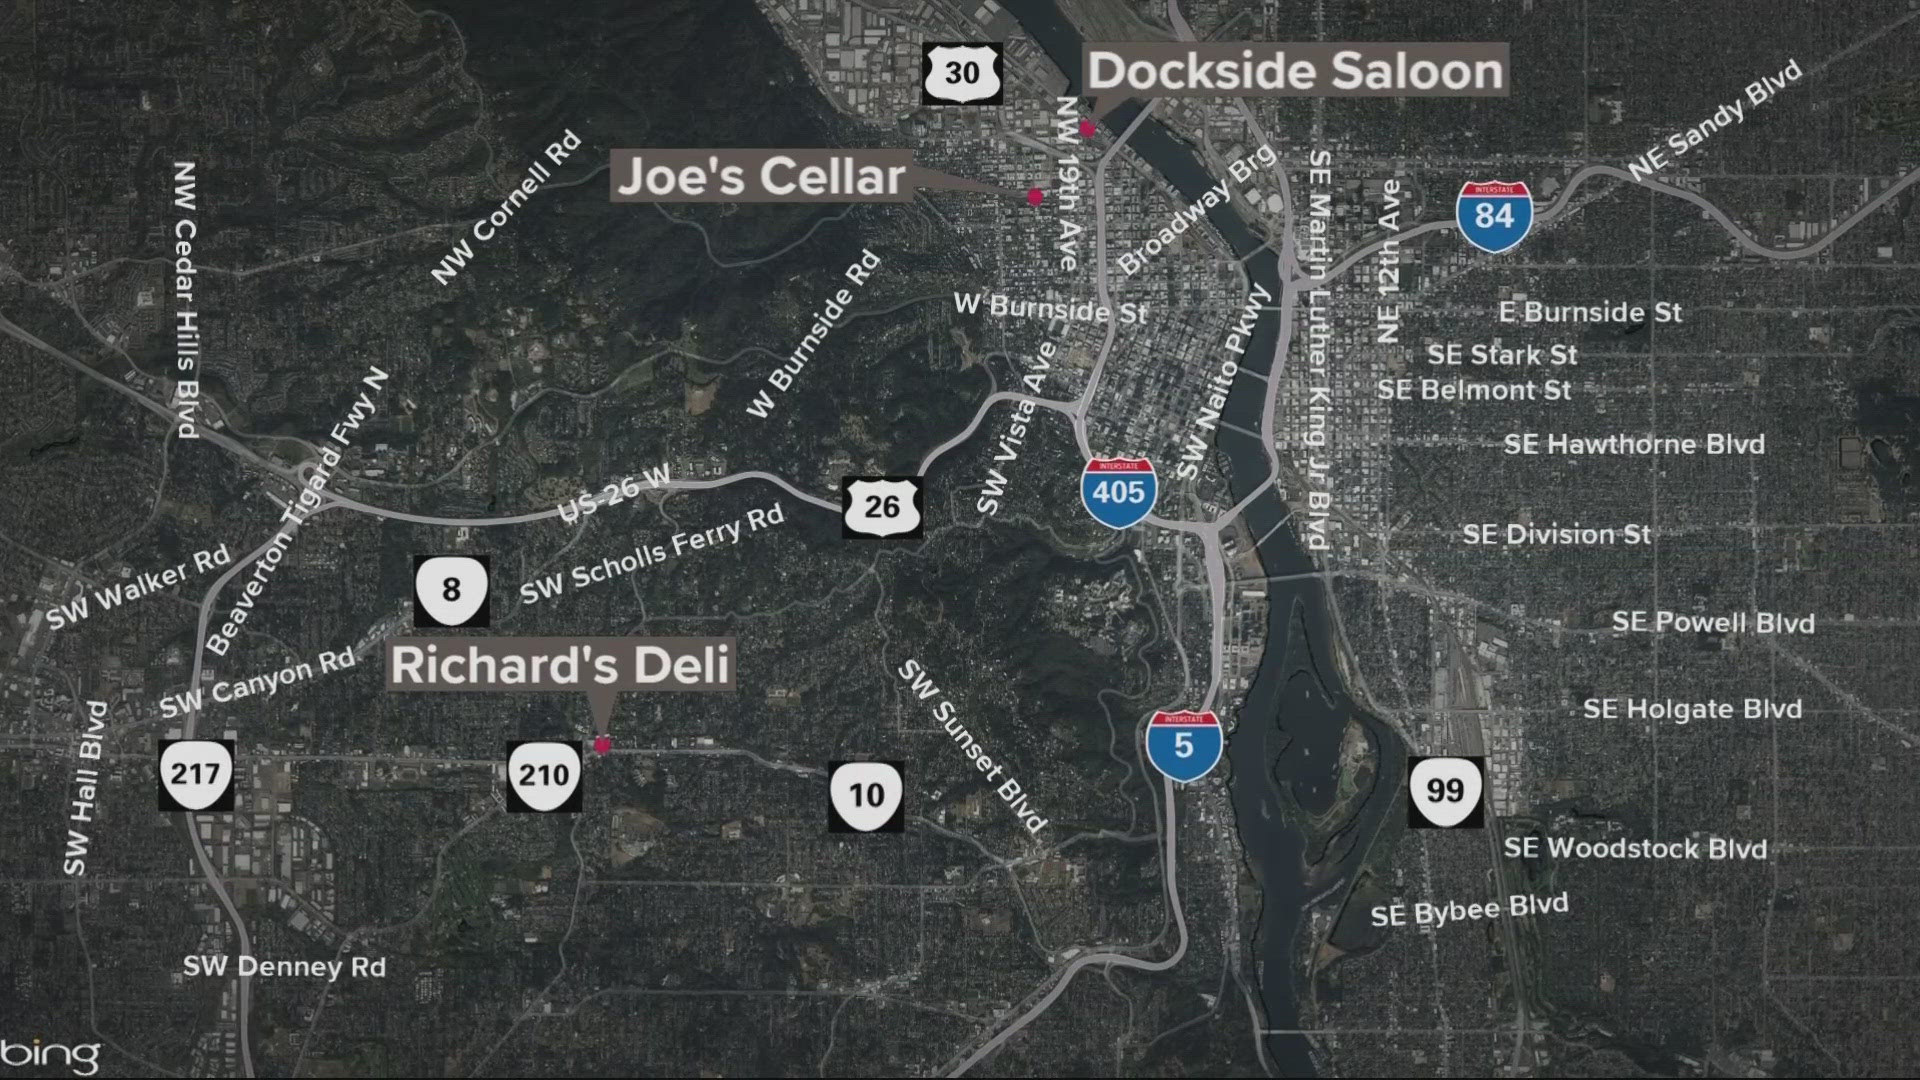 Three restaurants and bars were hit by an armed robber all within 30 minutes of each other in the Portland metro area.